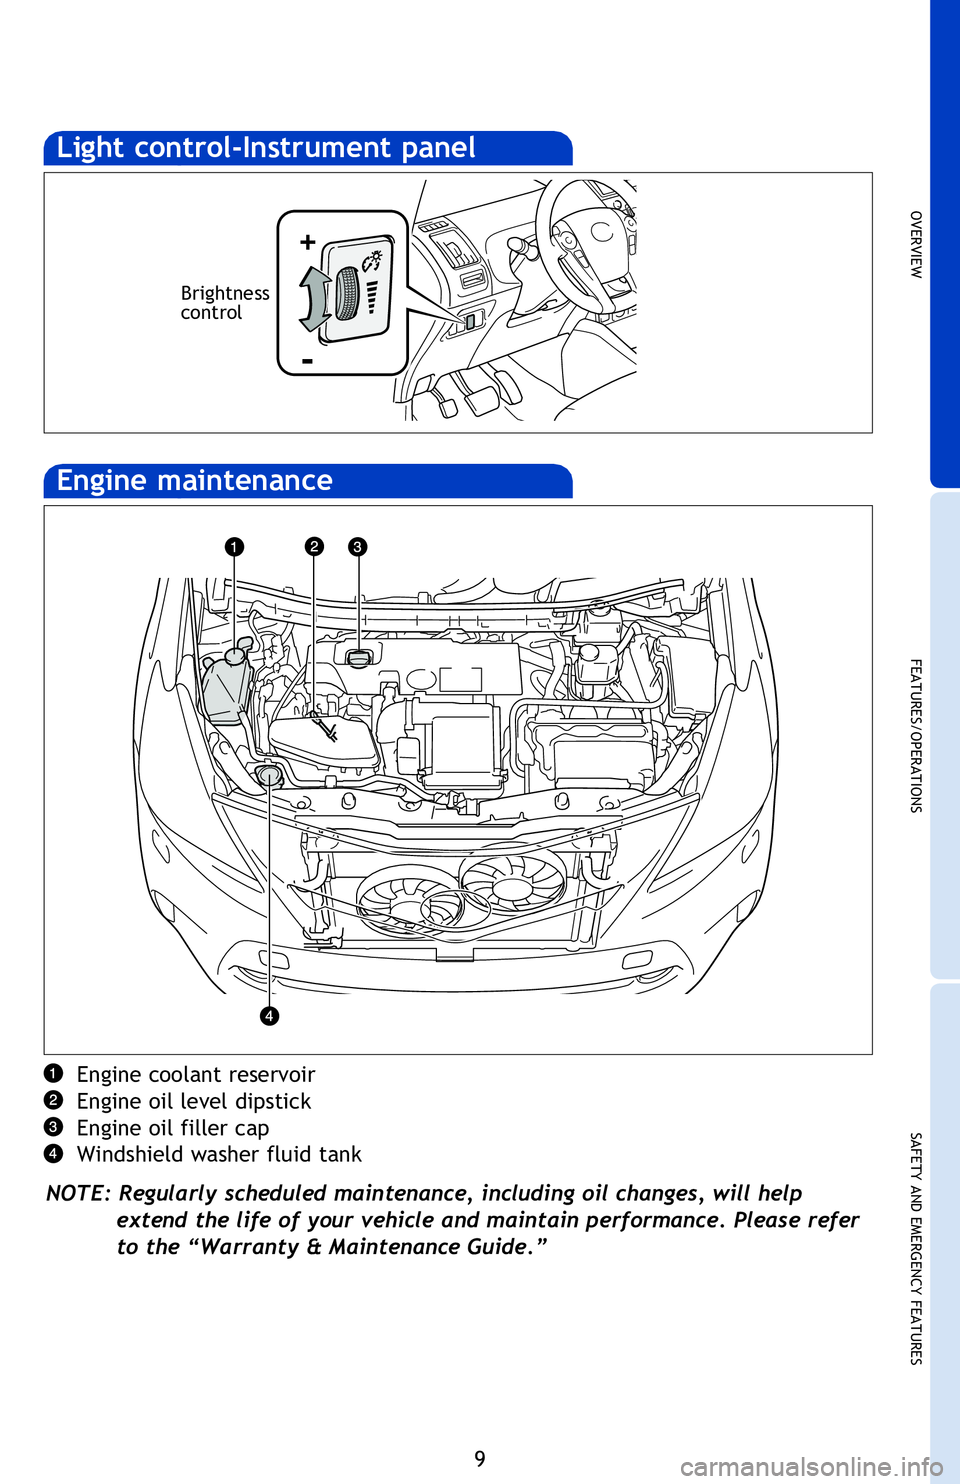 TOYOTA PRIUS V 2013  Owners Manual (in English) OVERVIEW
FEATURES/OPERATIONS
SAFETY AND EMERGENCY FEATURES
9
OVERVIEW
Engine coolant reservoir 
Engine oil level dipstick
Engine oil filler cap
Windshield washer fluid tank
NOTE: Regularly scheduled m